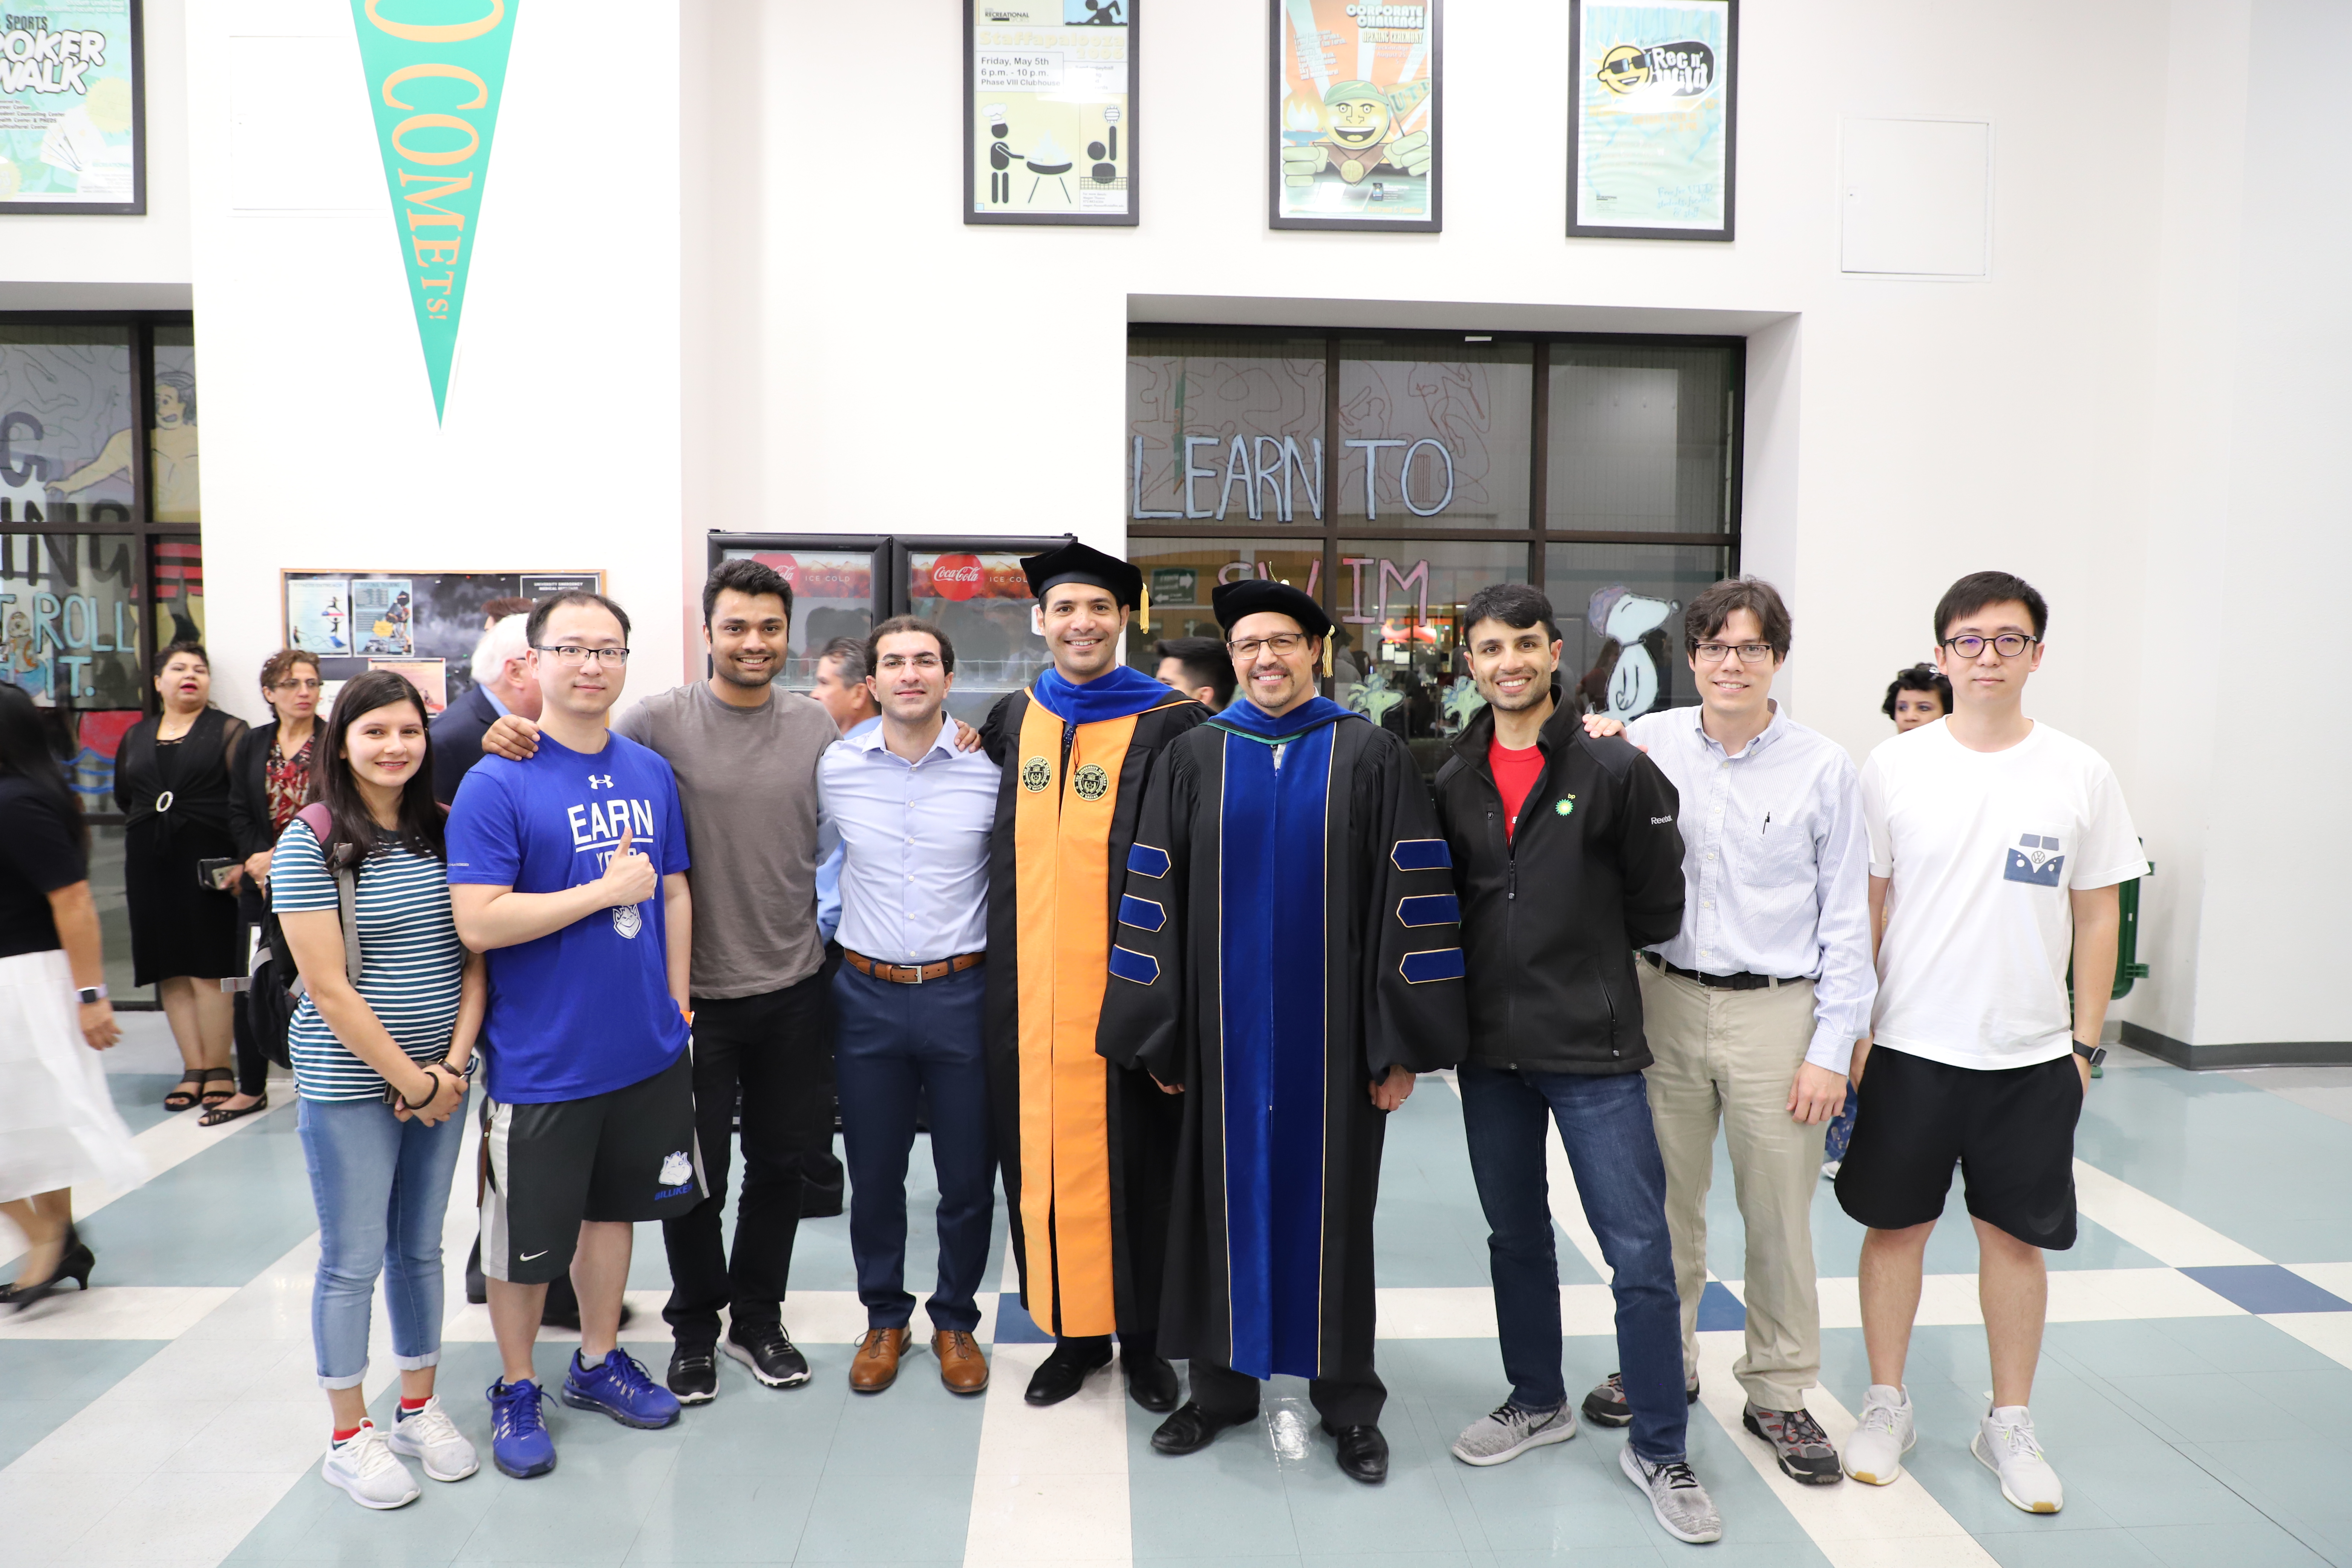  Malik and eight others pose together at a graduation ceremony.